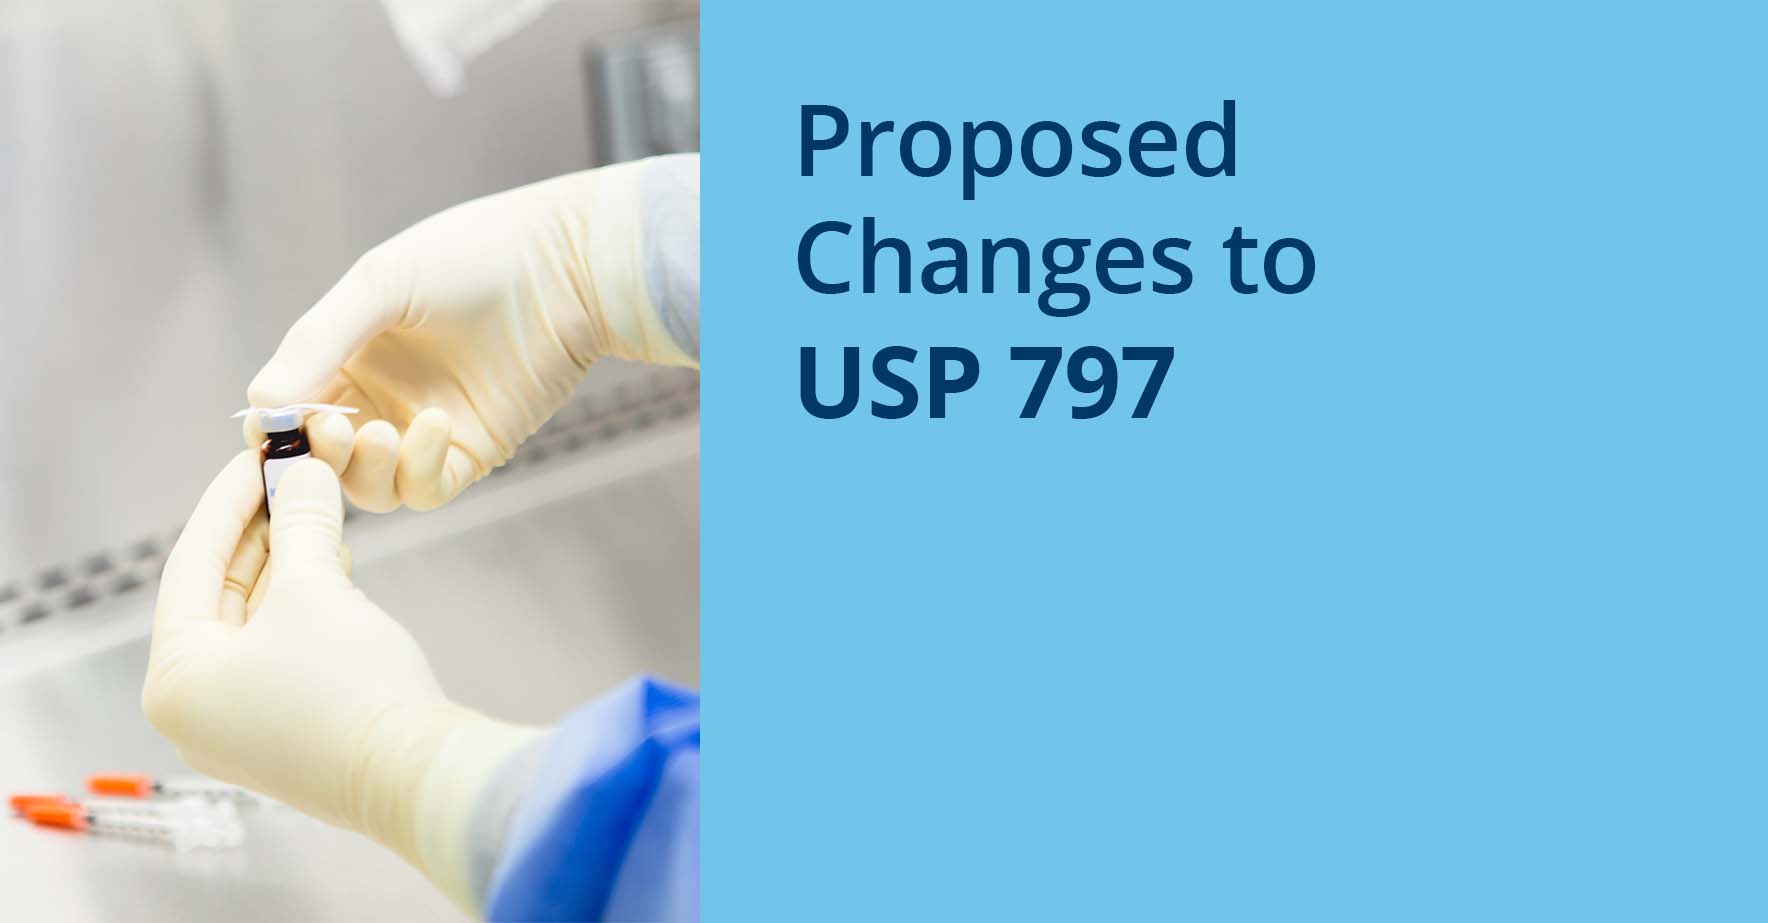 THE PCCA BLOG Proposed Changes to USP 797